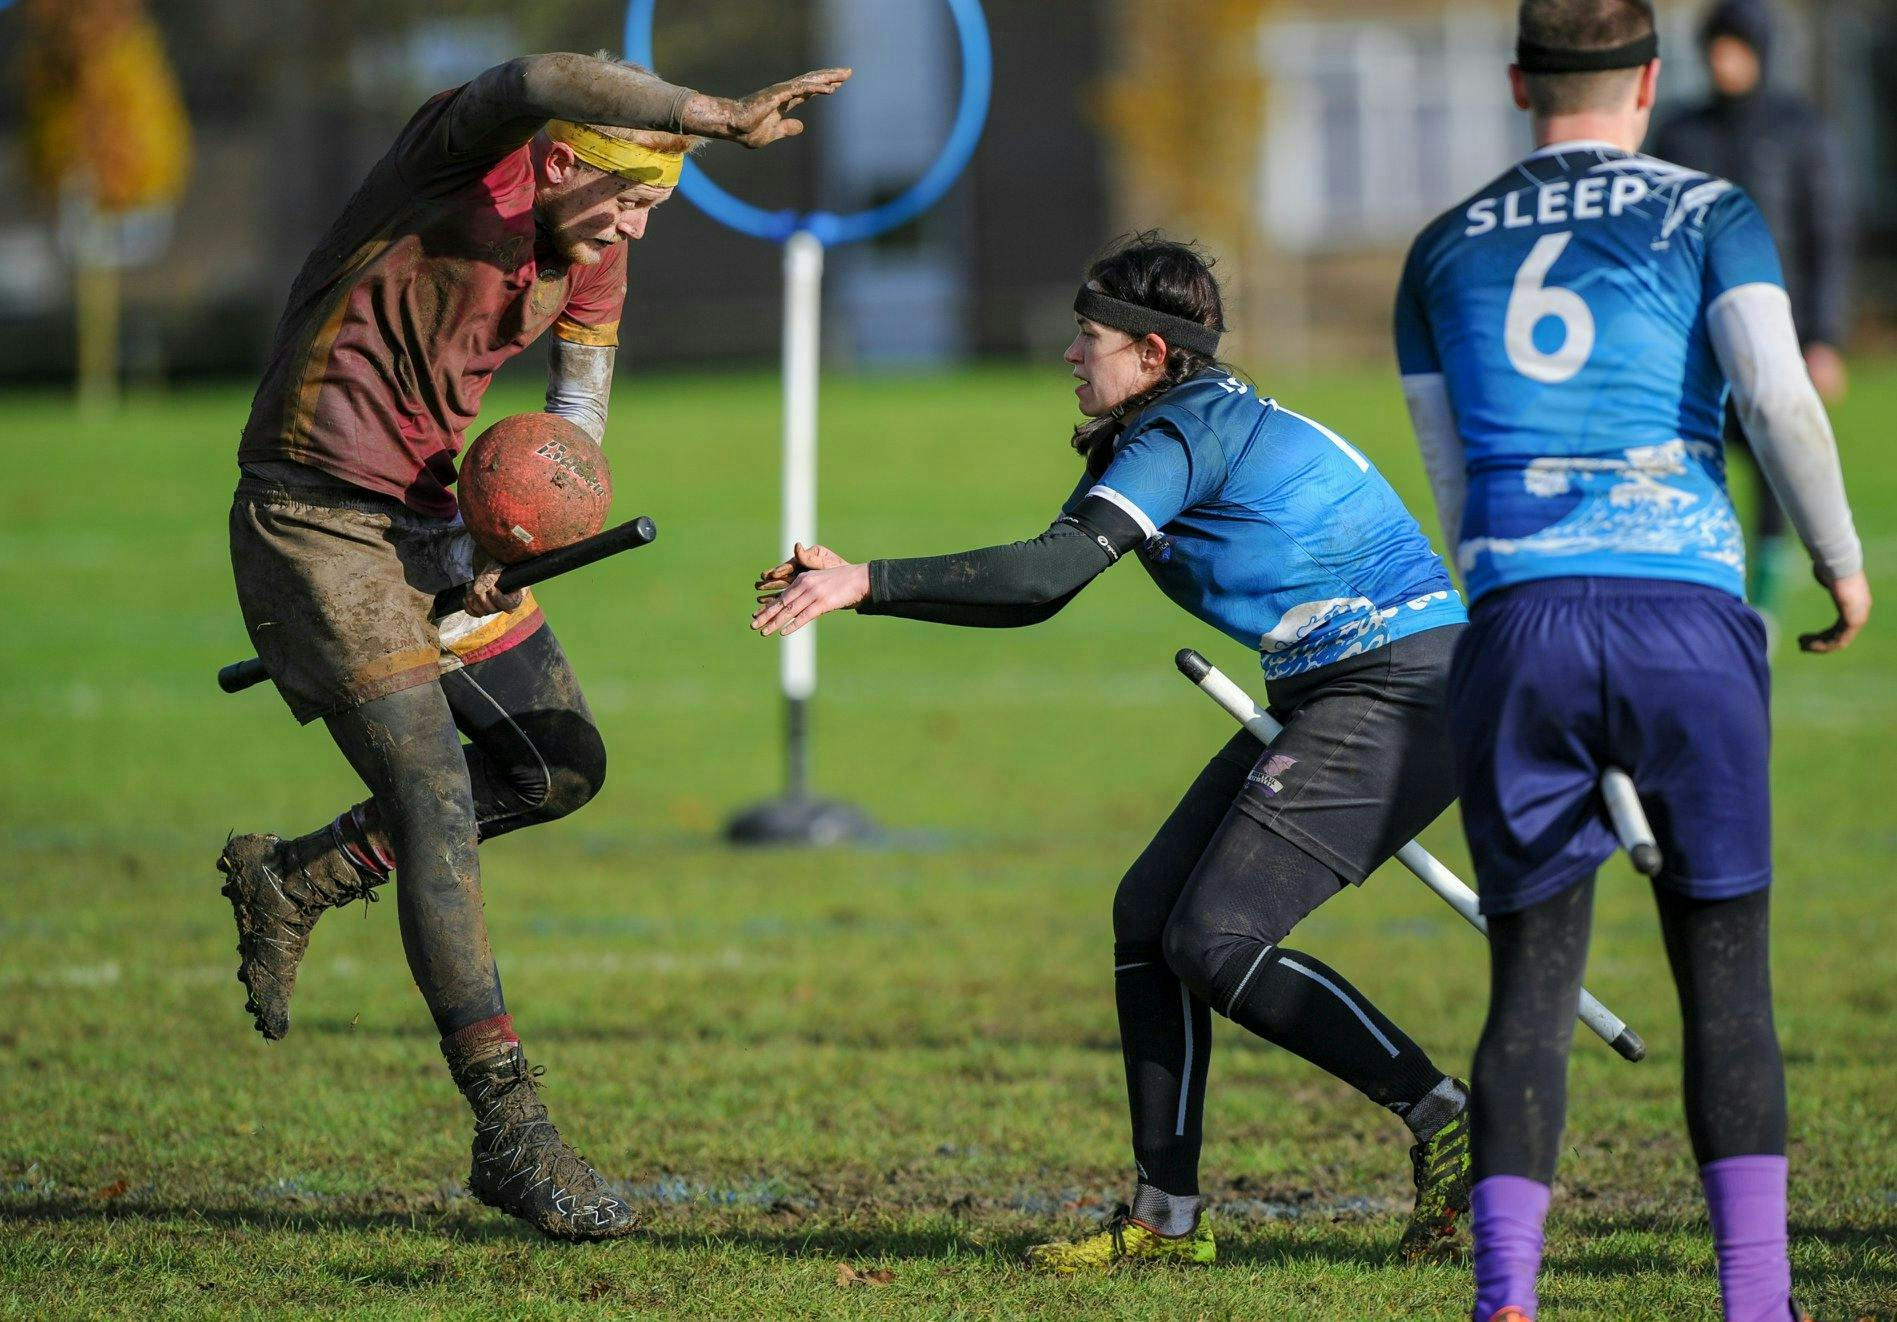 Southsea Quidditch Beater throws a bludger at Werewolves of London seeker who is attempting to avoid the ball